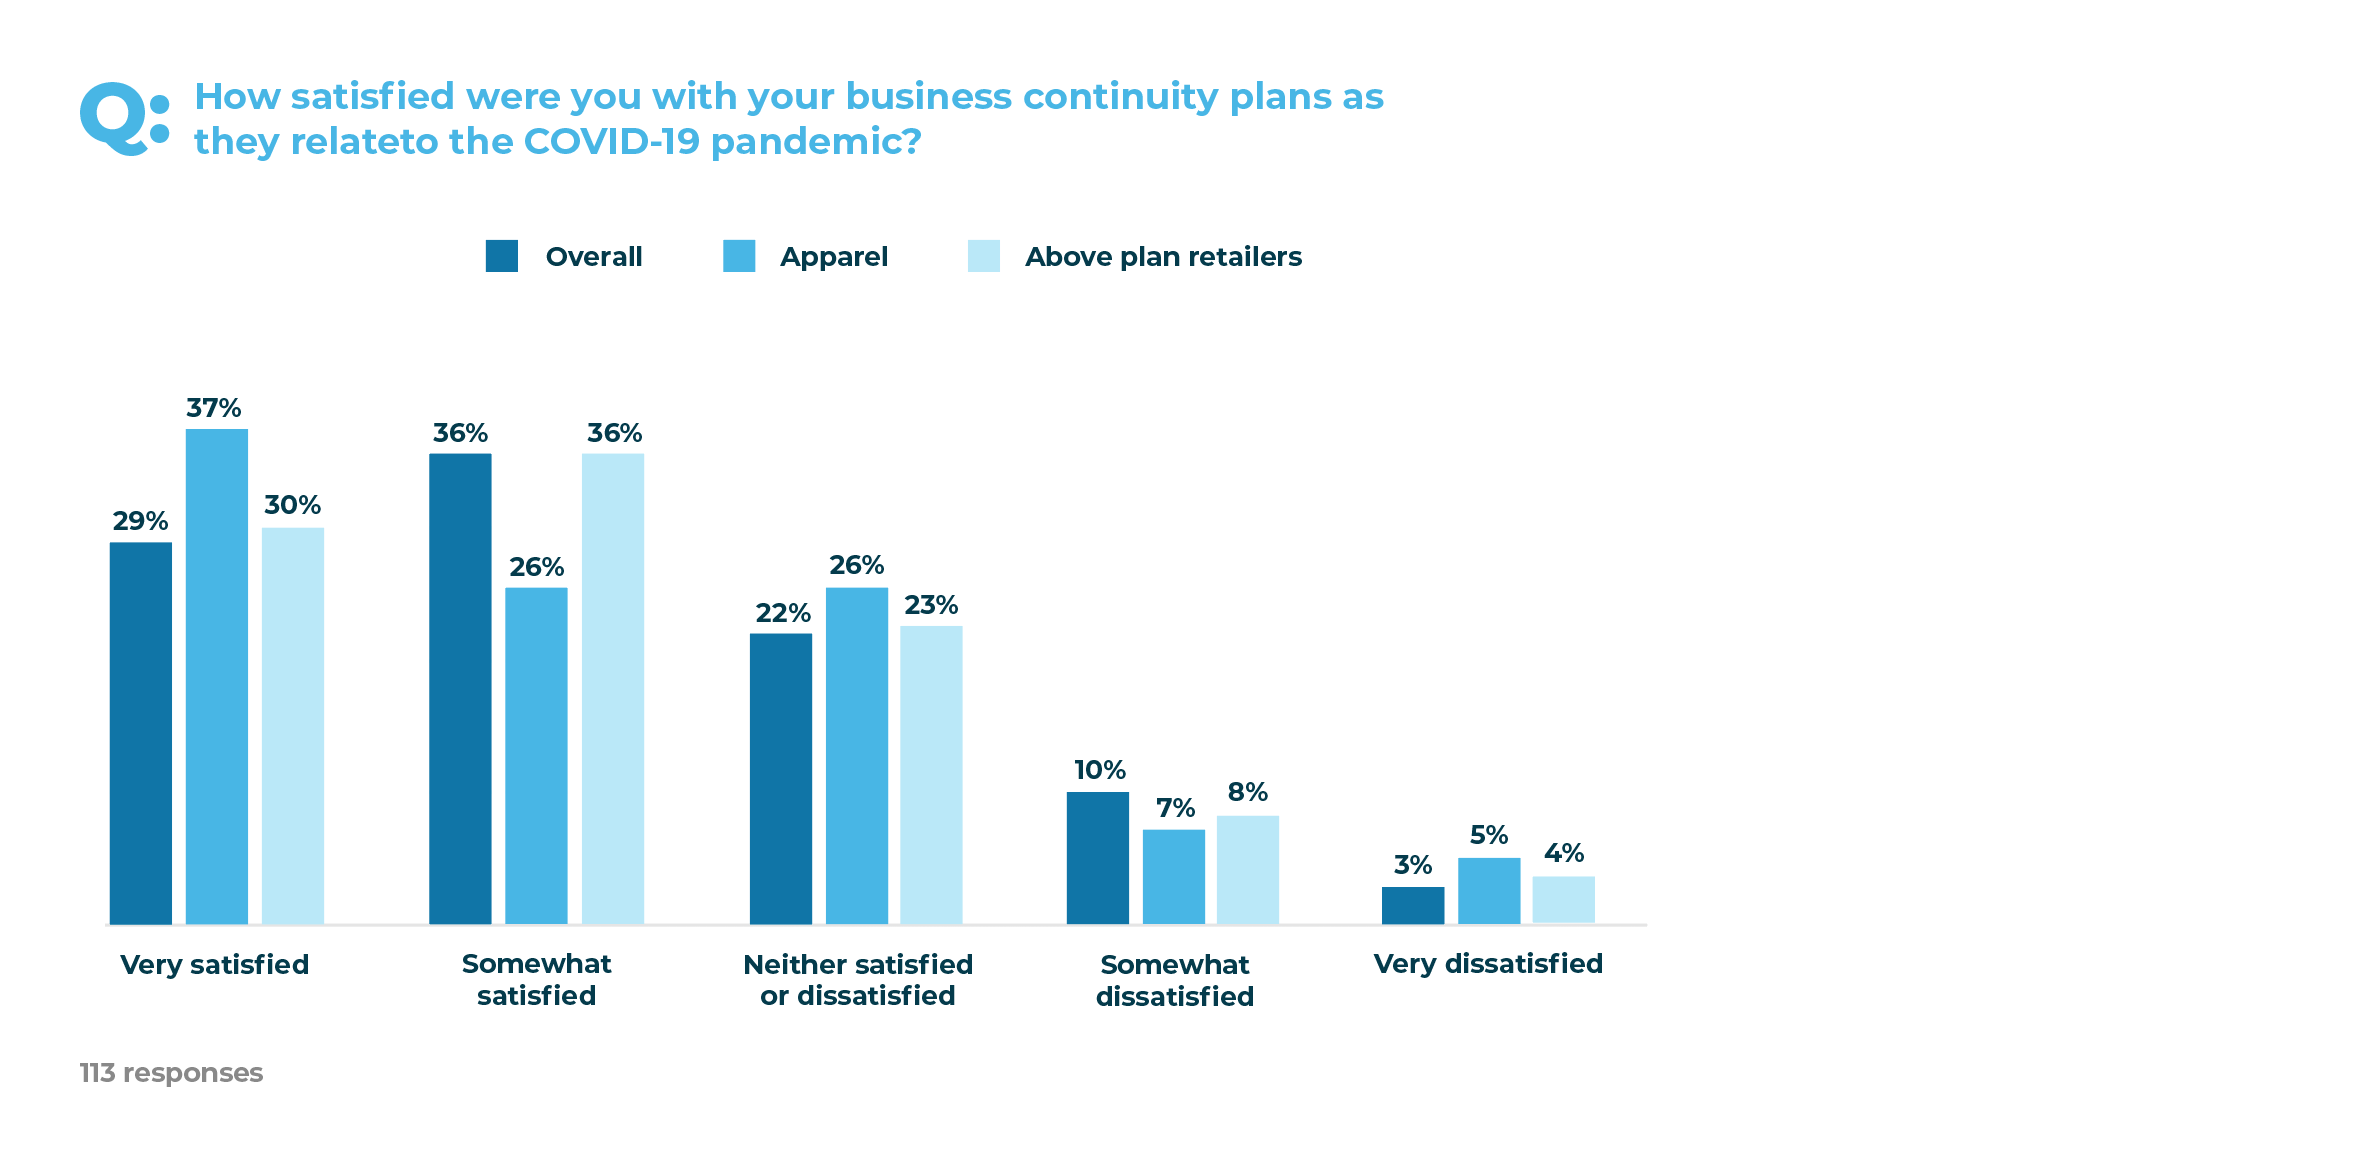 How satisfied were you with your business continuity plans as they relate to the COVID-19 pandemic? 